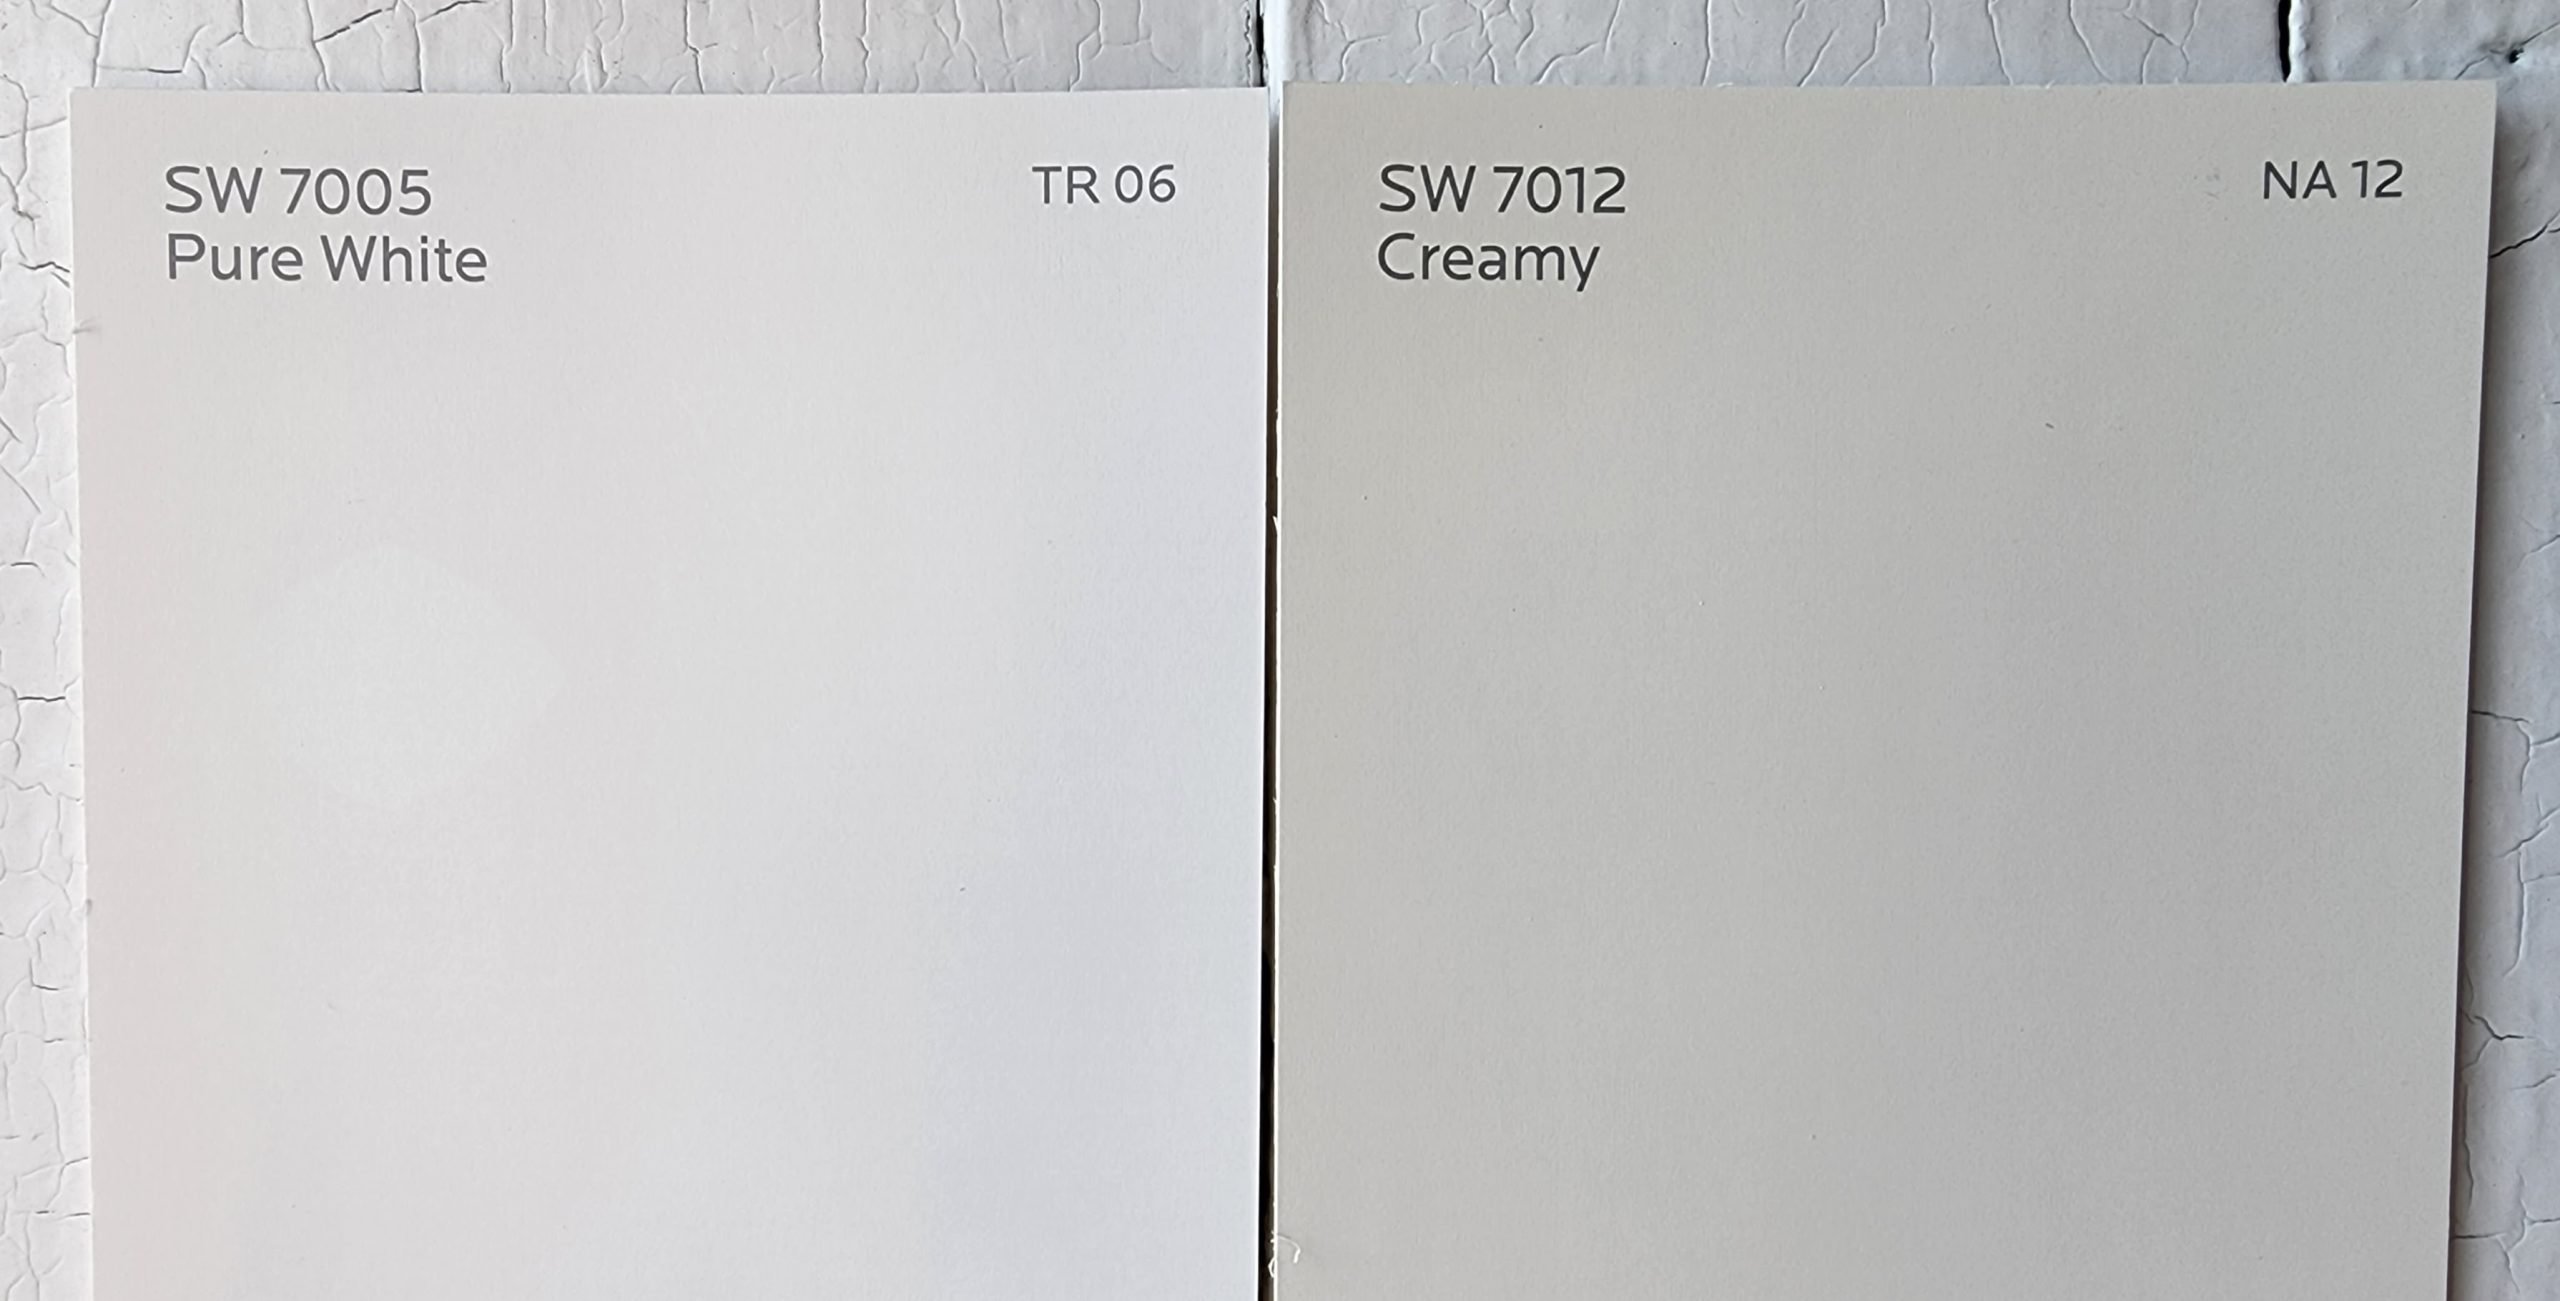  Pure White vs Creamy by Sherwin Williams scaled